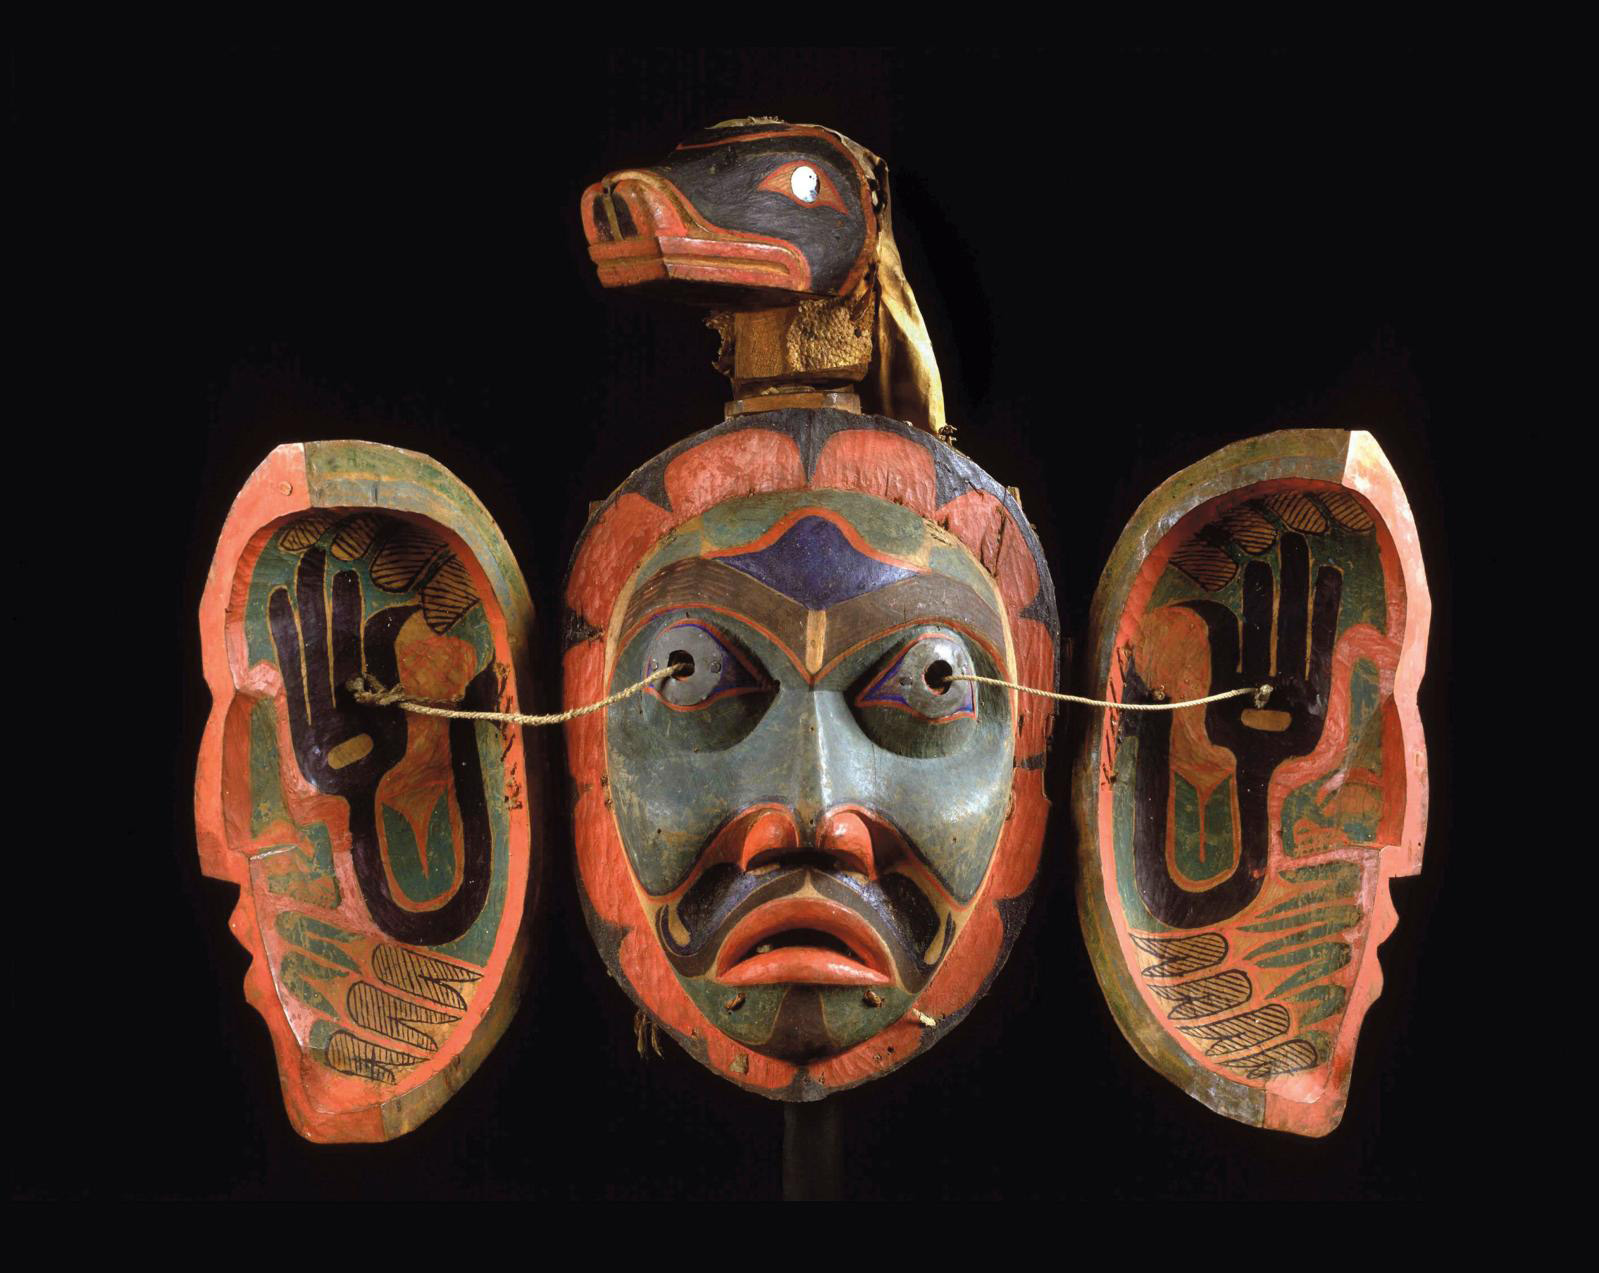 Canada, British Columbia, before 1881. Transformation mask, Fort Rupert, Vancouver Island, carved and painted red cedar.© Staatliche Musee